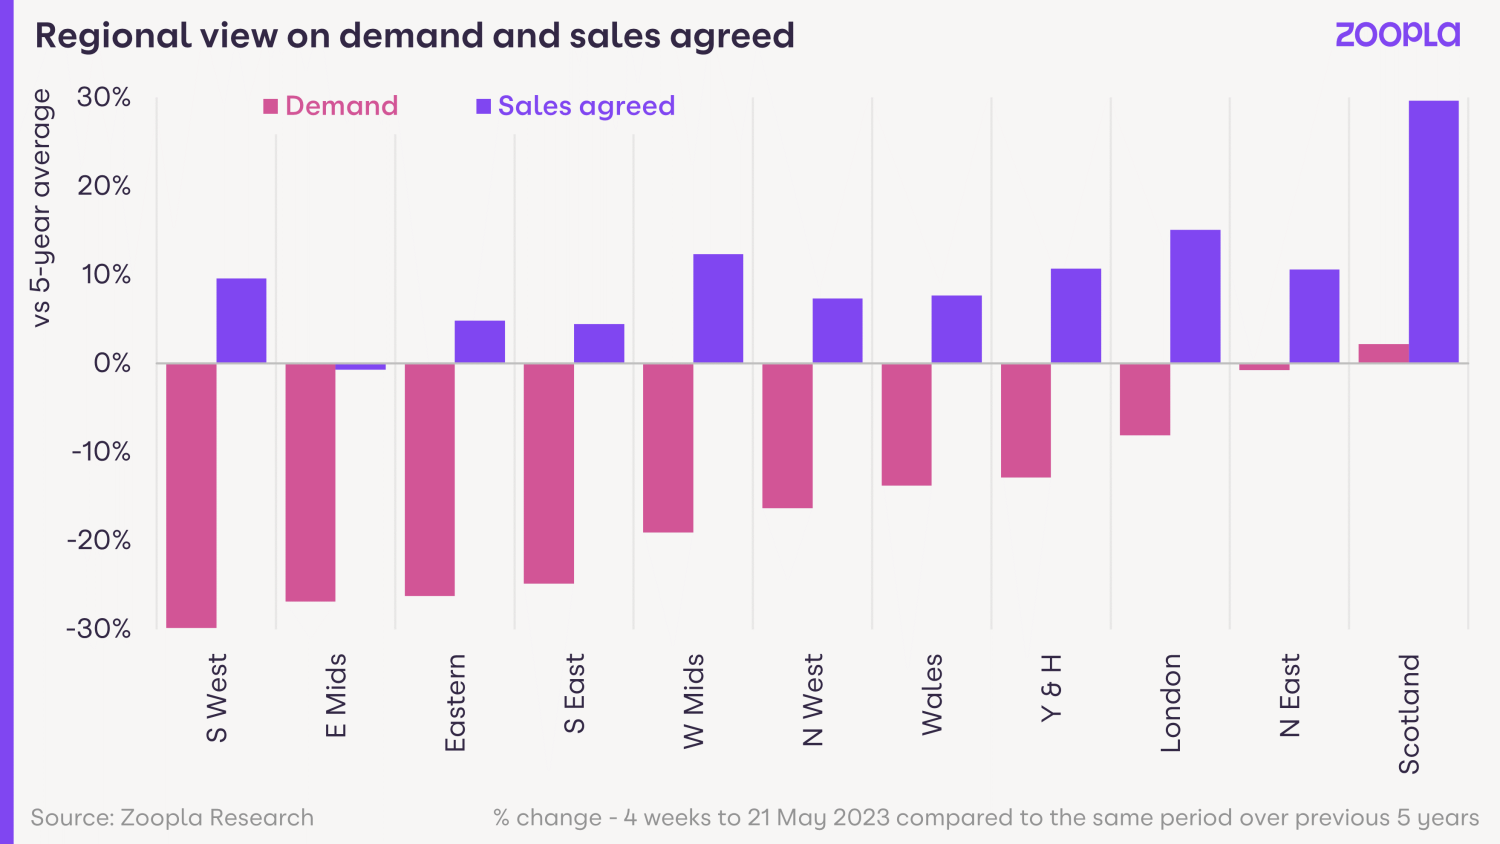 A chart showing that buyer demand is lower and number of property sales higher in UK regions vs the 5-year average. Buyer demand is down by the most - by up to 30% in the South East and East Midlands.